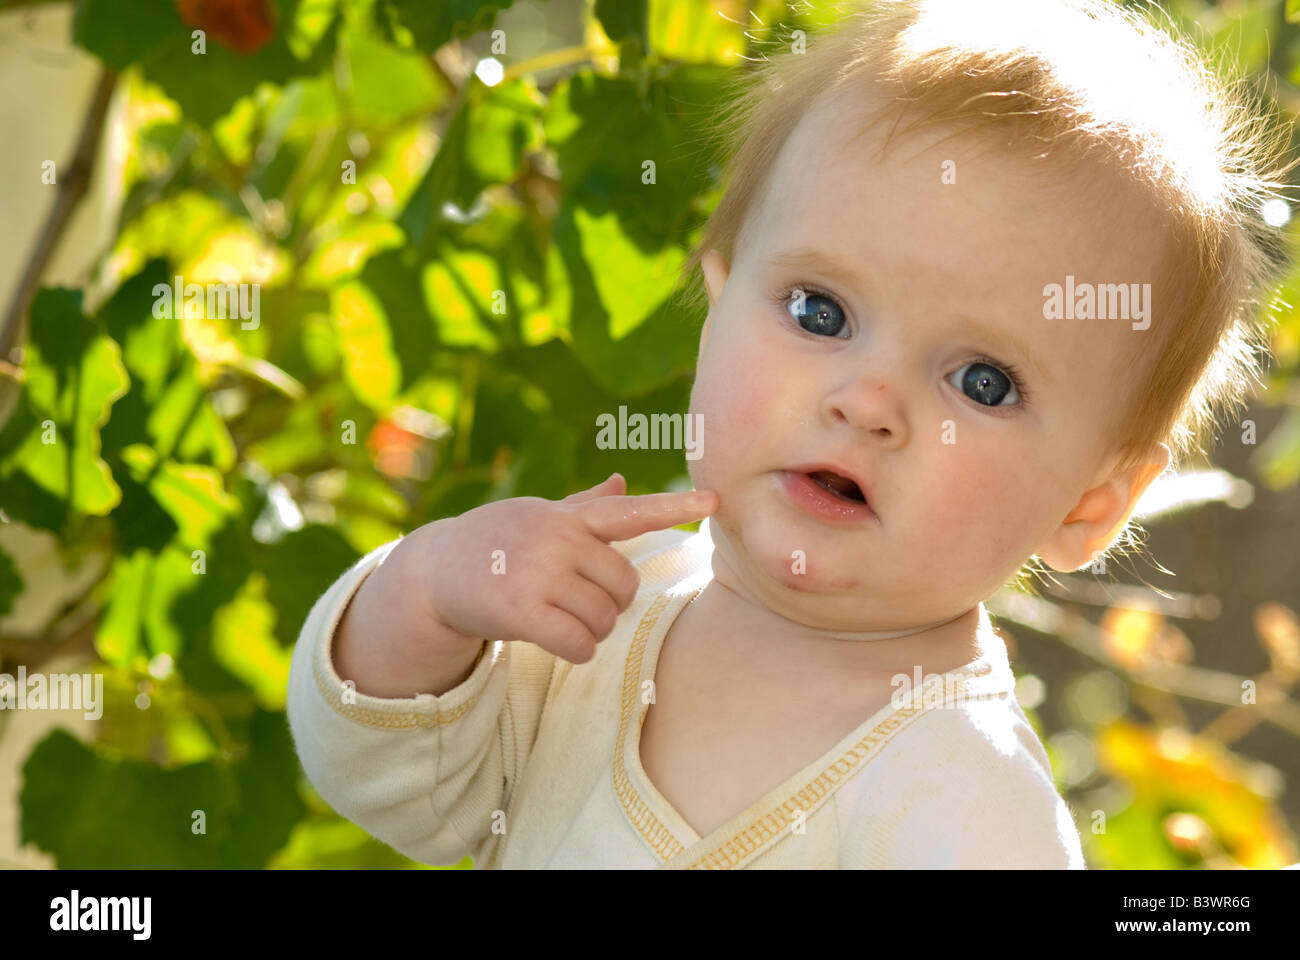 child with an idea, a thought, a question Stock Photo